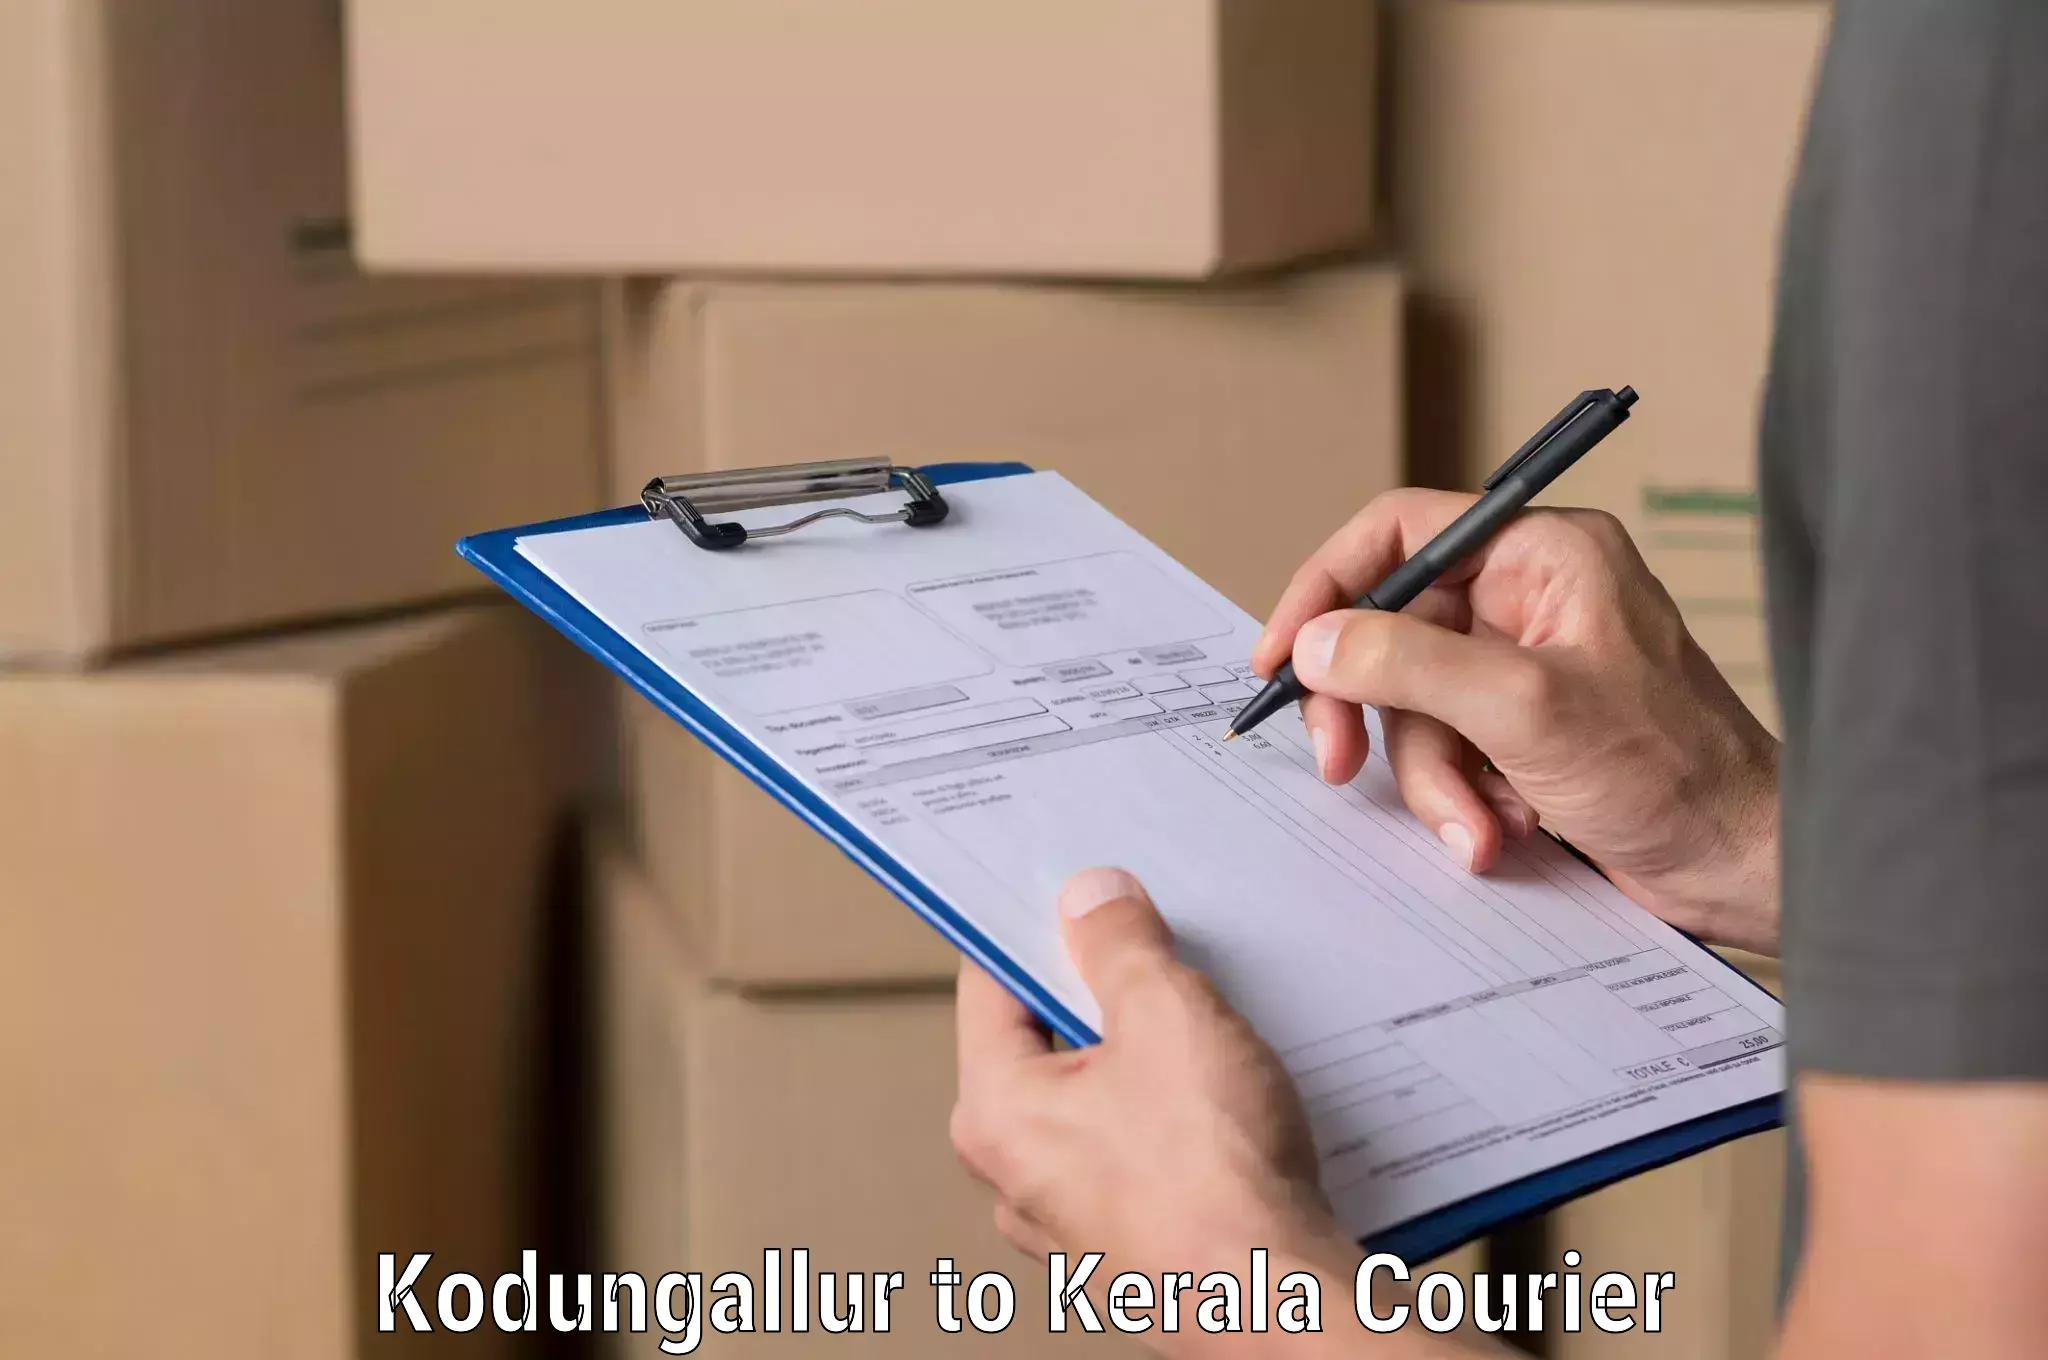 Customizable delivery plans Kodungallur to Kottayam